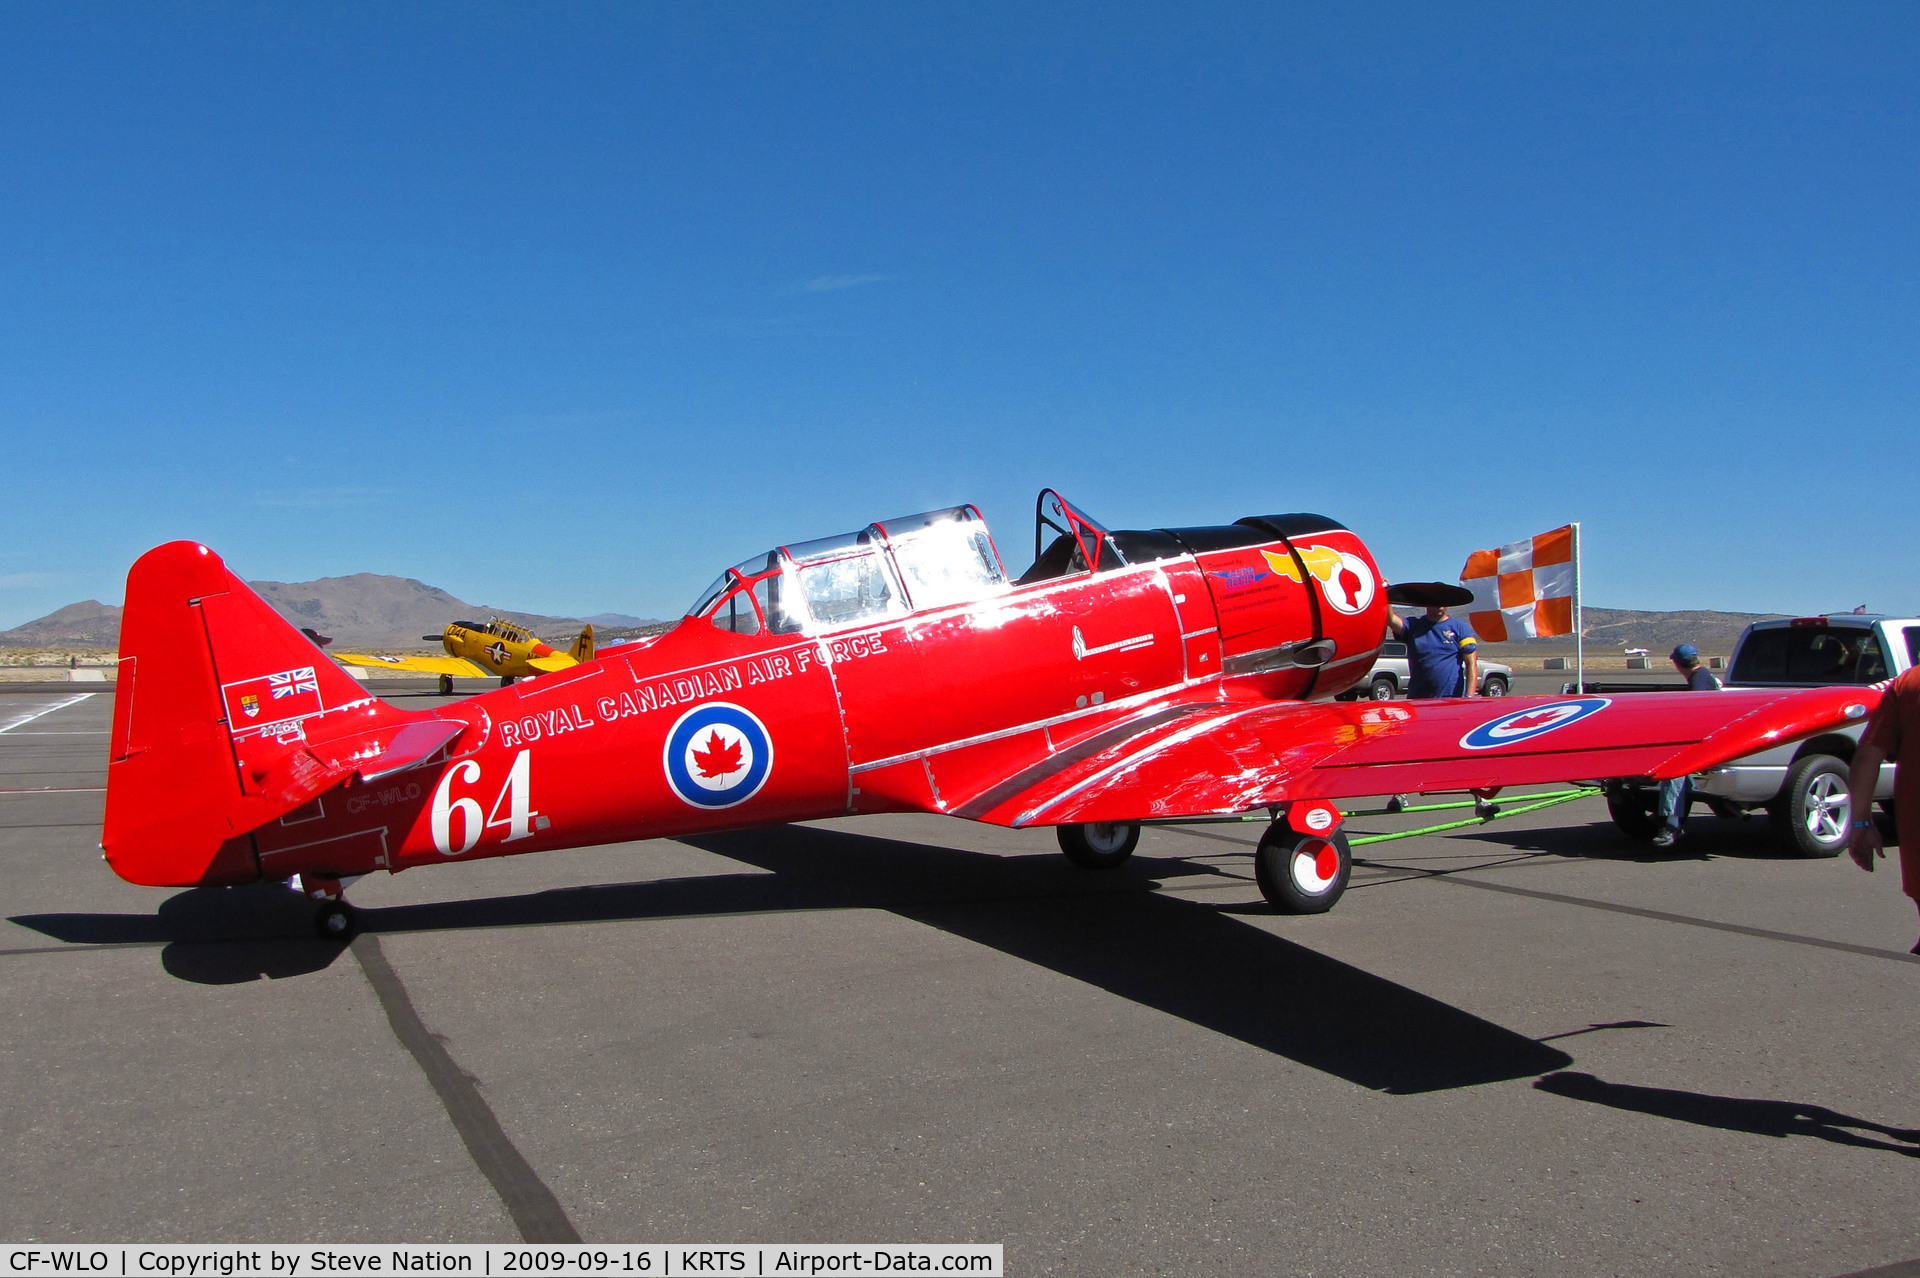 CF-WLO, 1945 Canadian Car & Foundry T-6 Harvard Mk.4 C/N CCF4-55, Race #64 is a CCF Harvard Mk. IV in Royal Canadian Air Force Red Knights colors being towed to active ramp for T-6 Class racing @ 2009 Reno Air Races